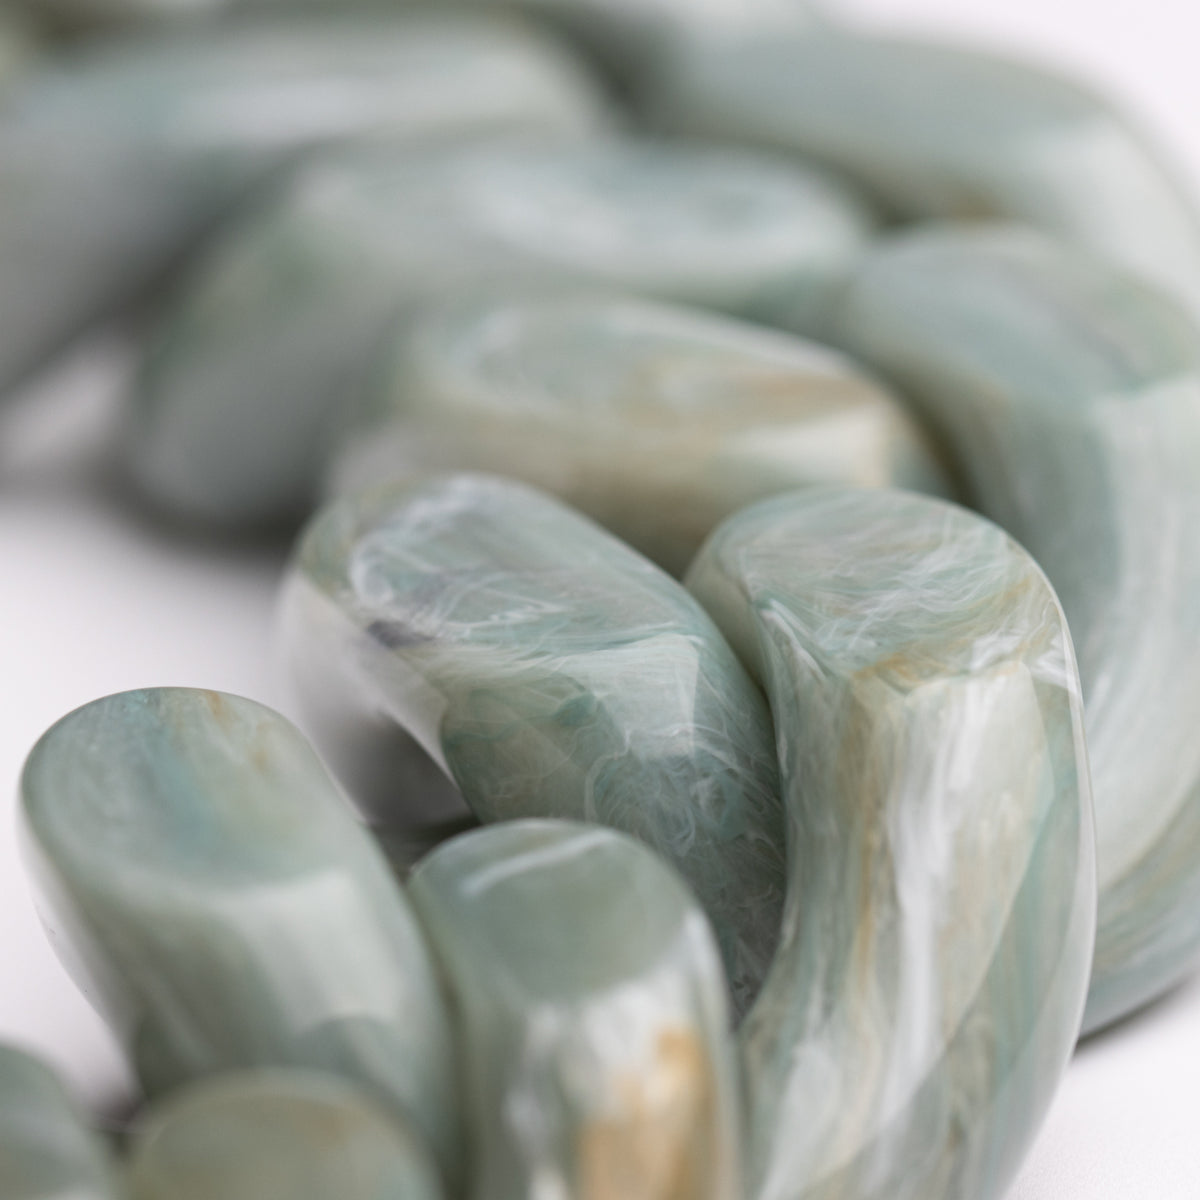 GREAT Necklace jade marble